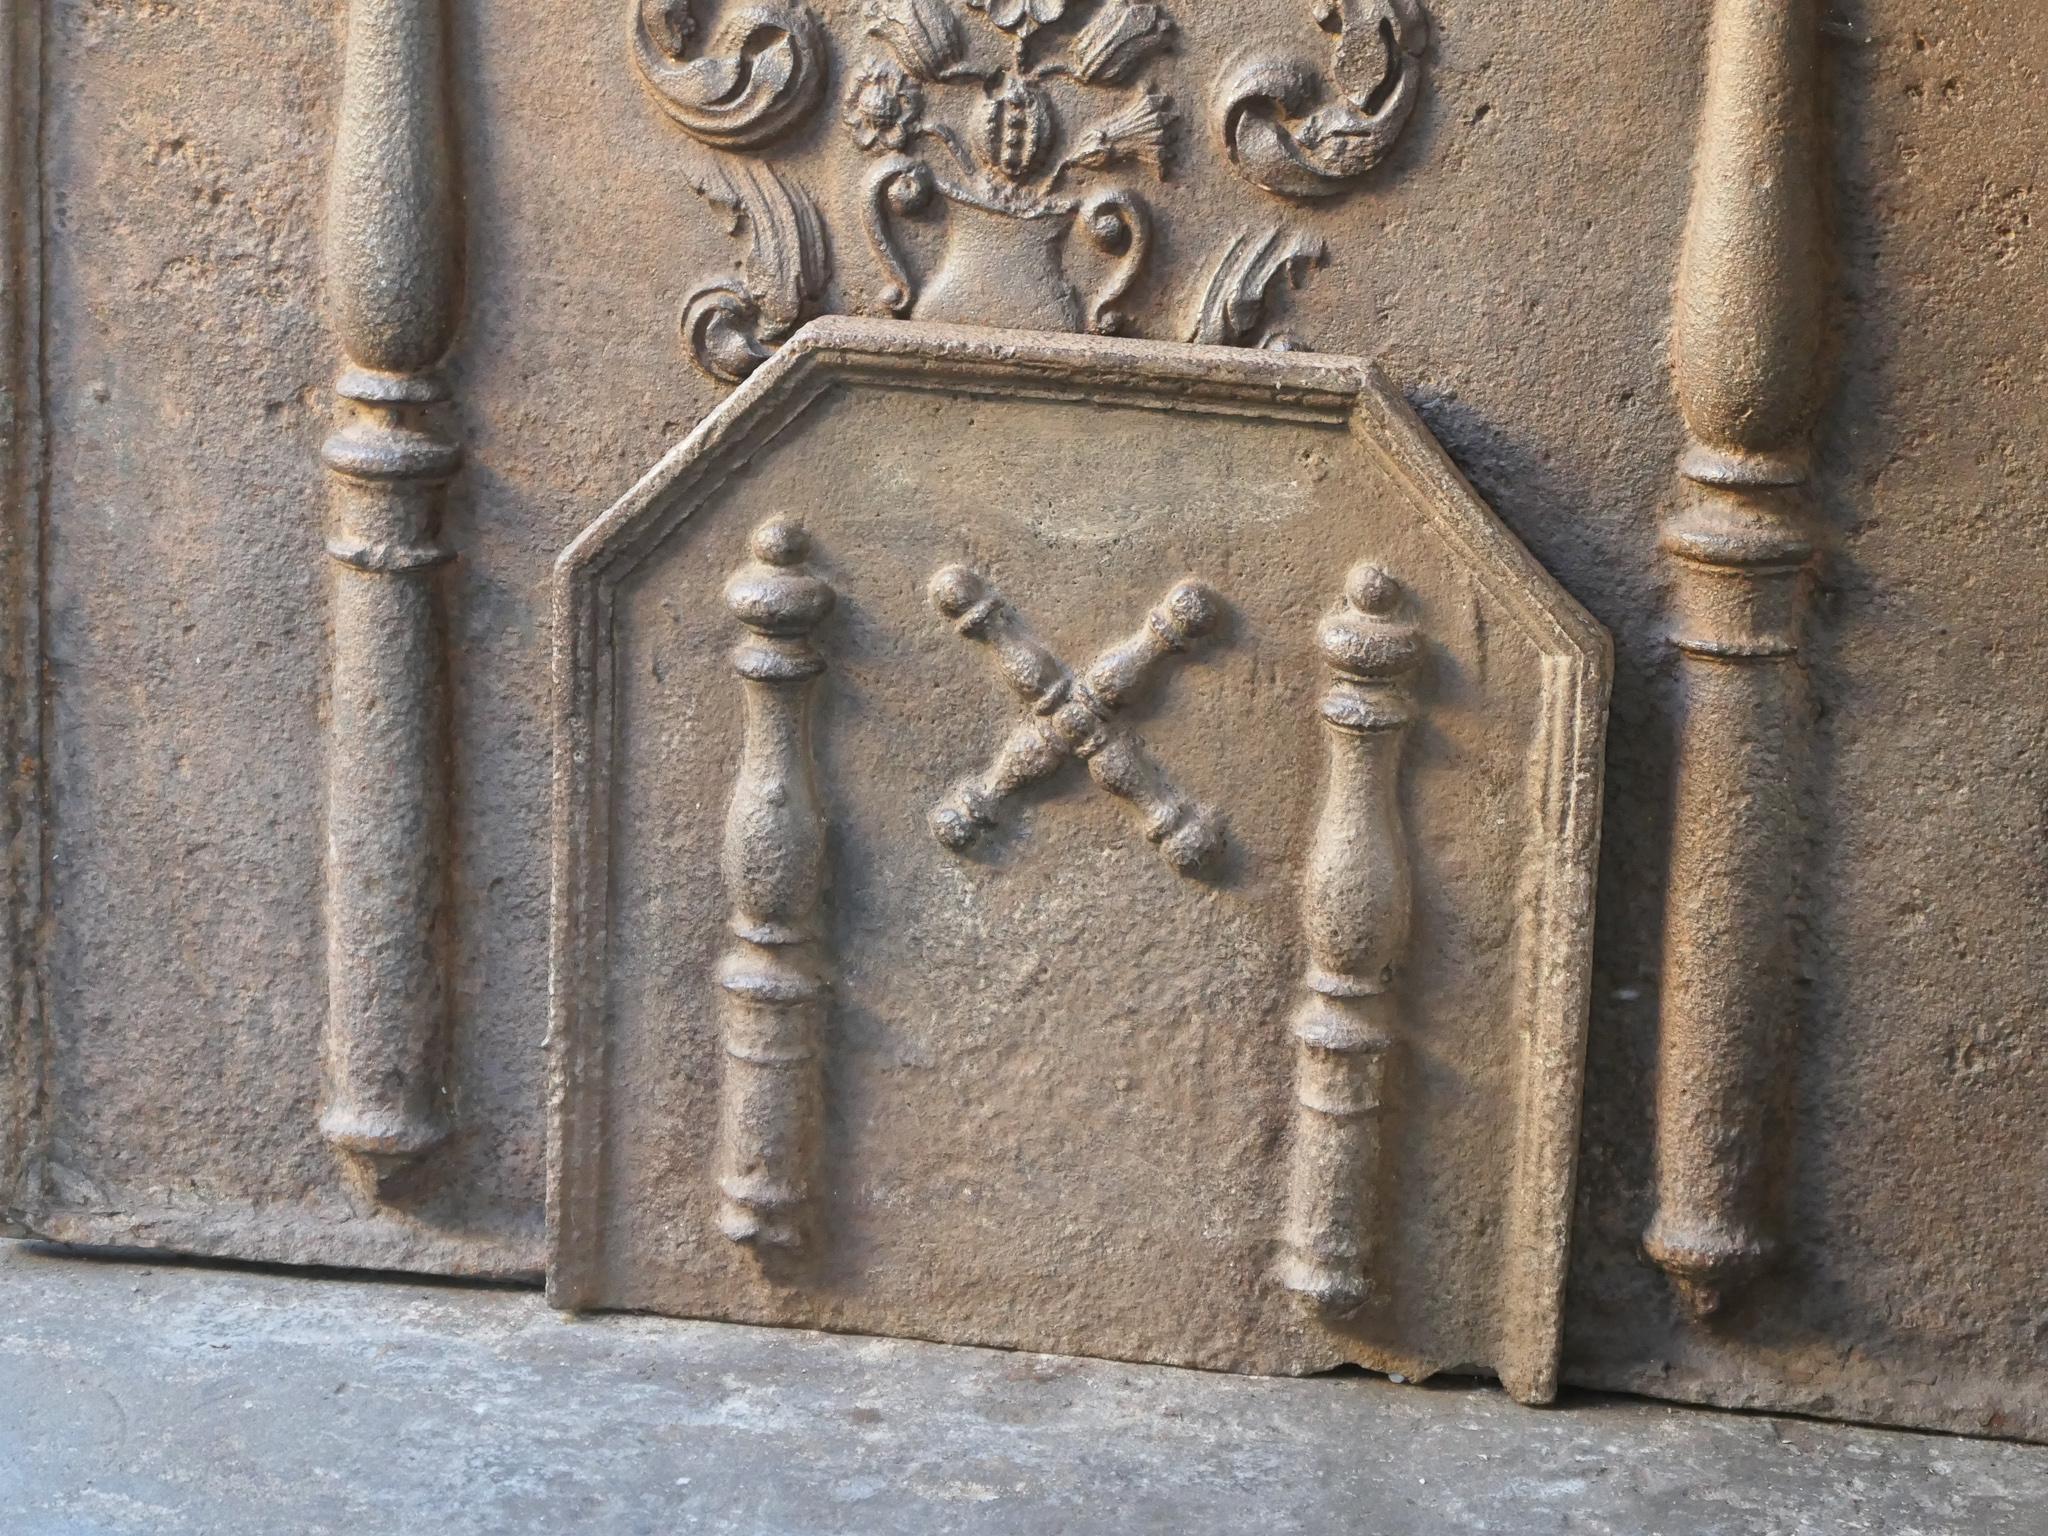 18th century French fireback with a Saint Andrew's cross and two pillars of Hercules. Saint Andrew is said to have been martyred on a cross in this shape. The cross is since then a sign for humility and sacrifice. The pillars of Hercules symbolize